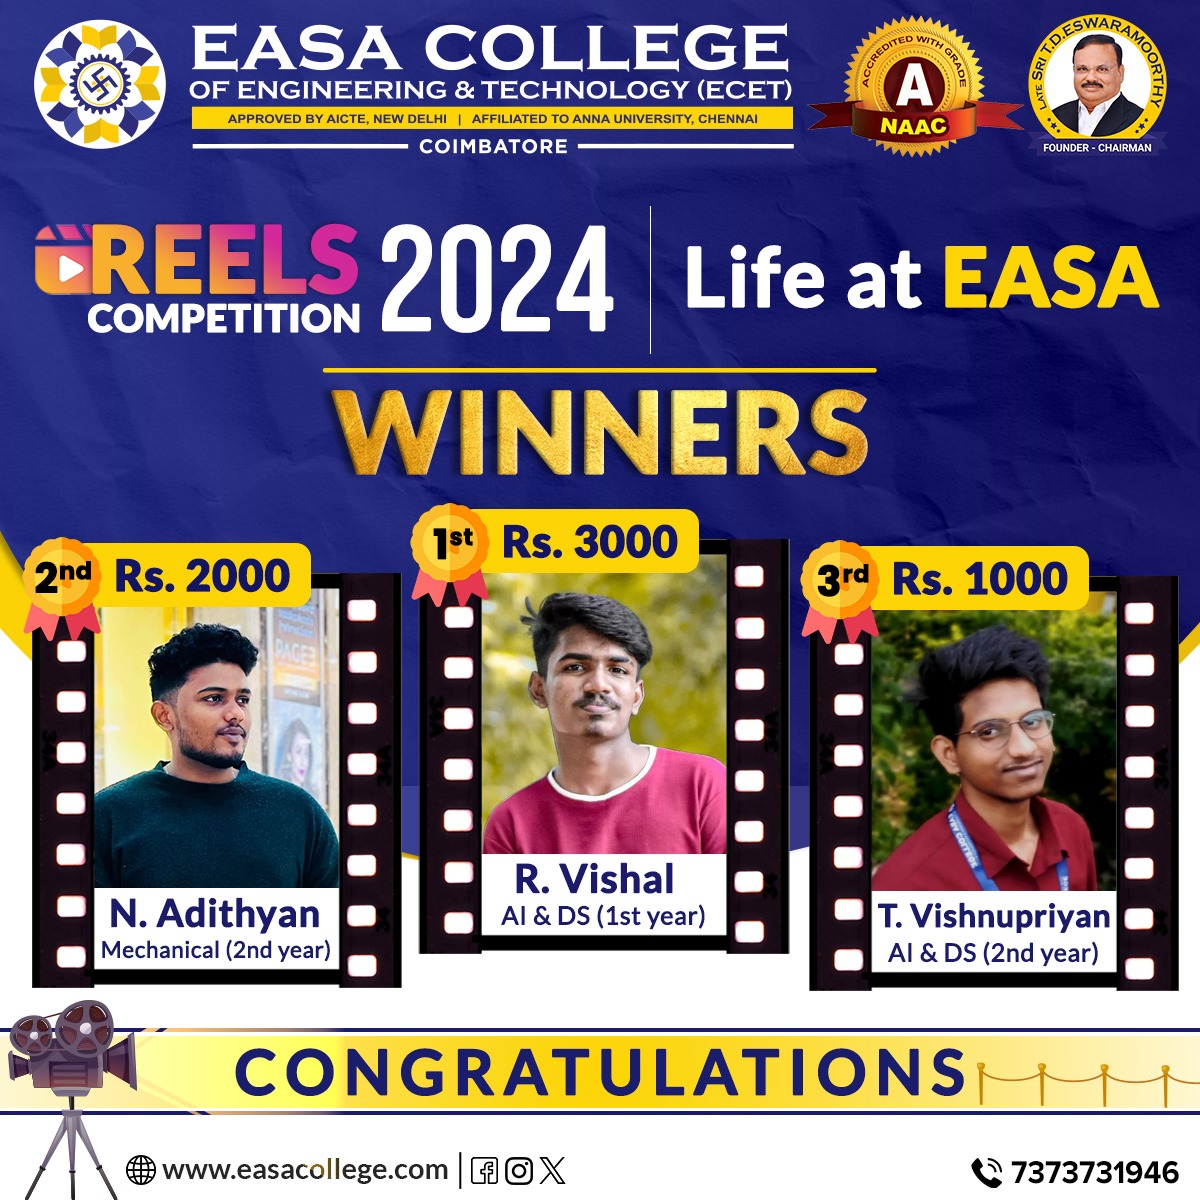 Reels Competition 2024 Winners - Life at EASA